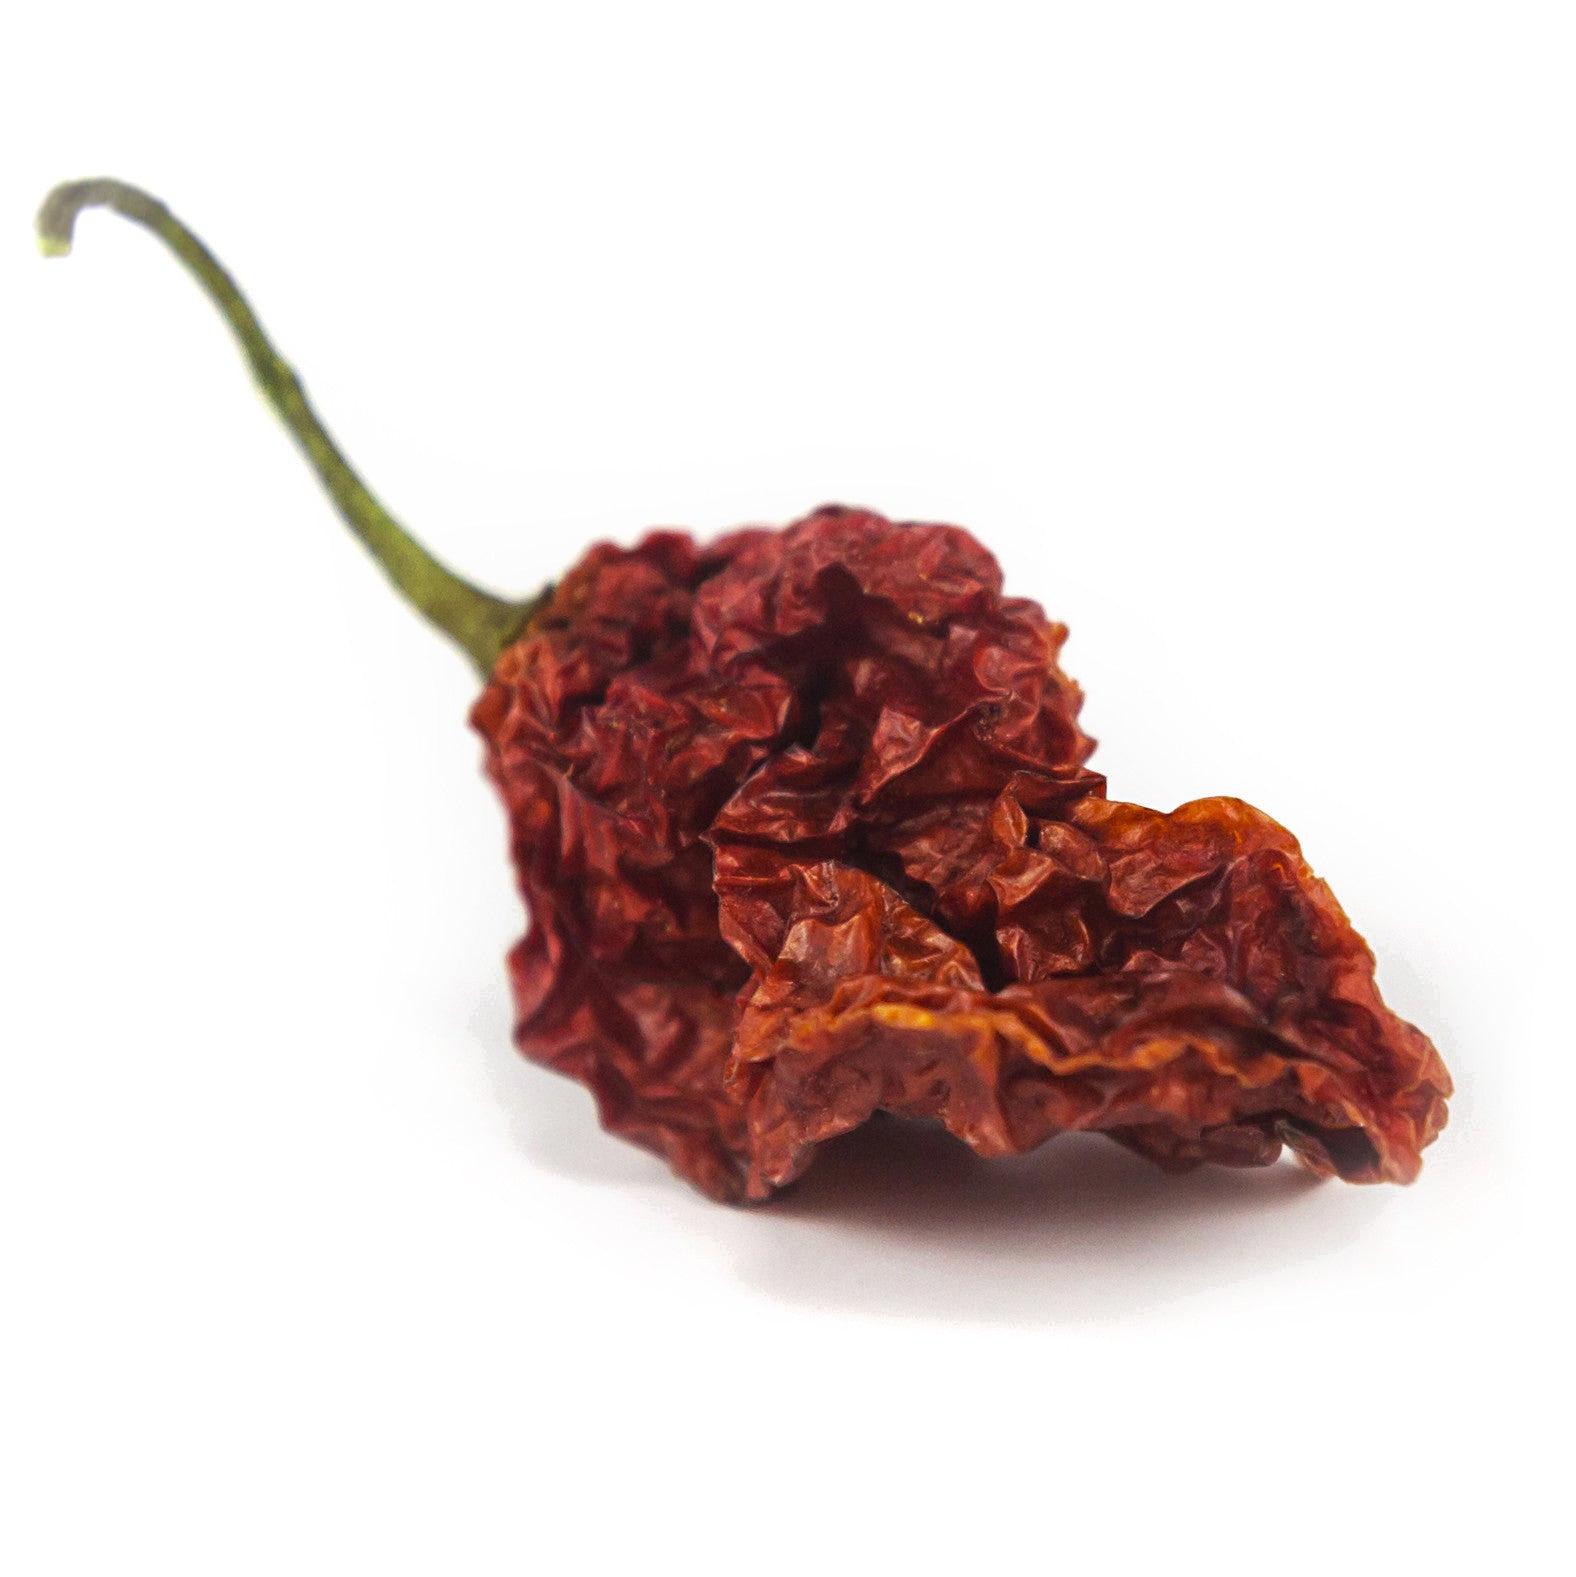 has the ghost pepper killed anyone